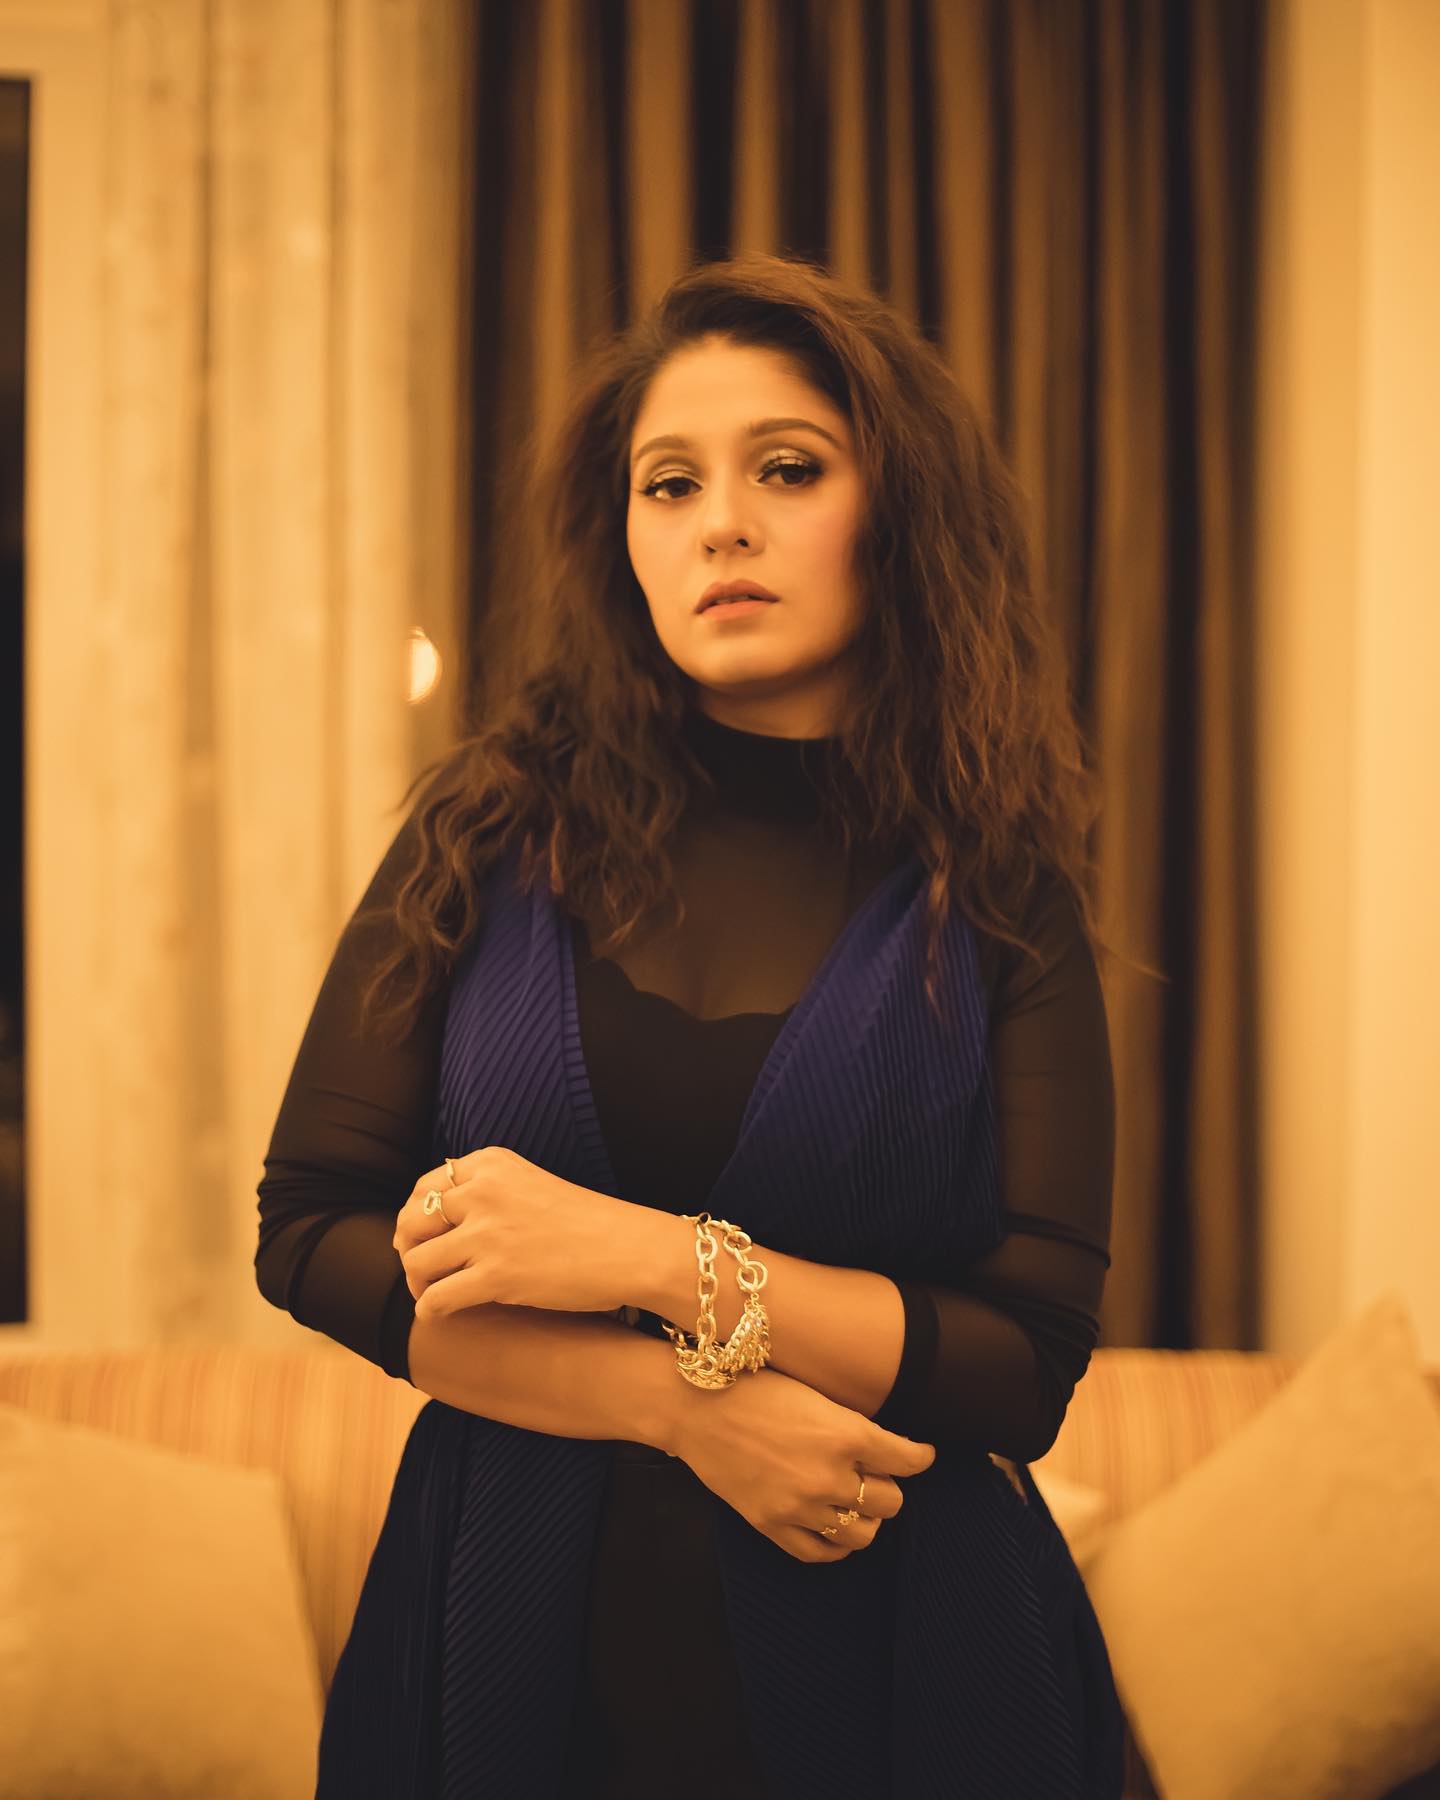 Sunidhi Chauhan on facing rejections